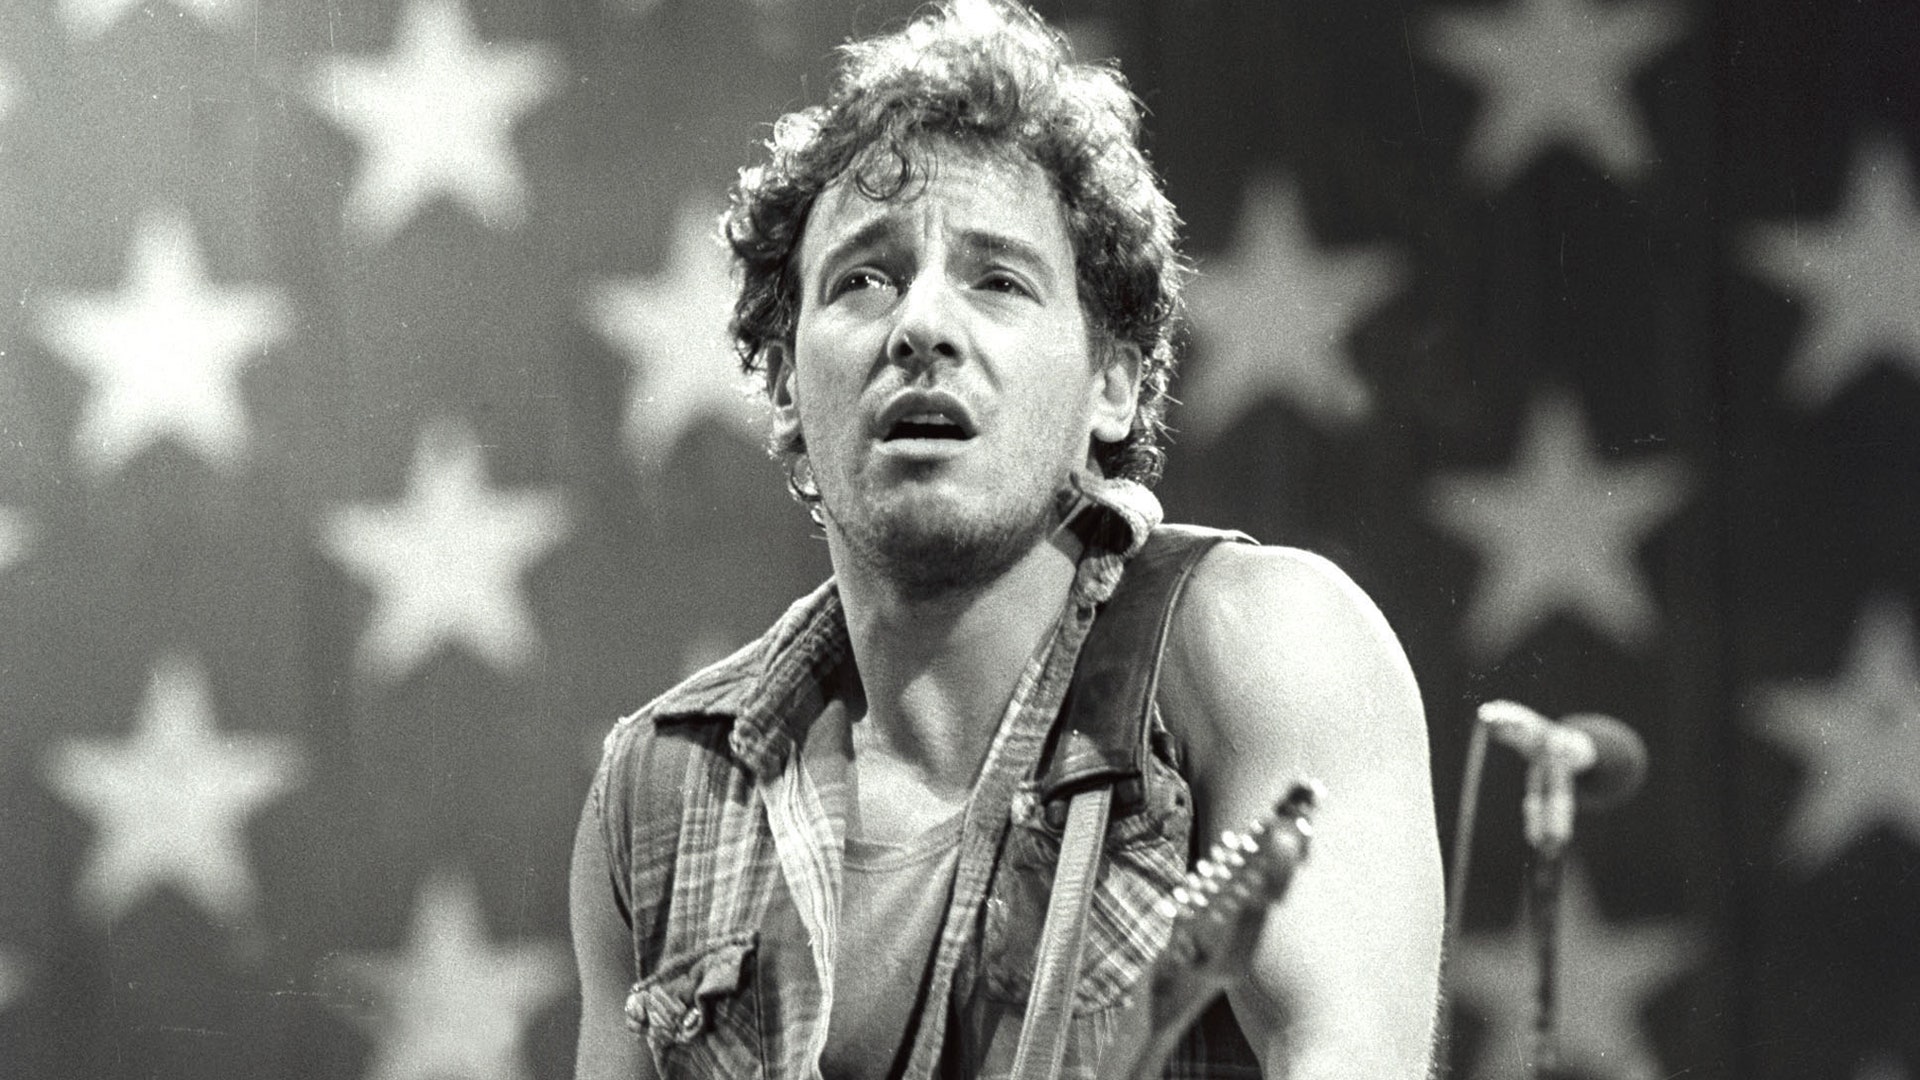 Bruce Springsteen Touching Performance at the 9/11 Memorial! I'll See You In My Dreams